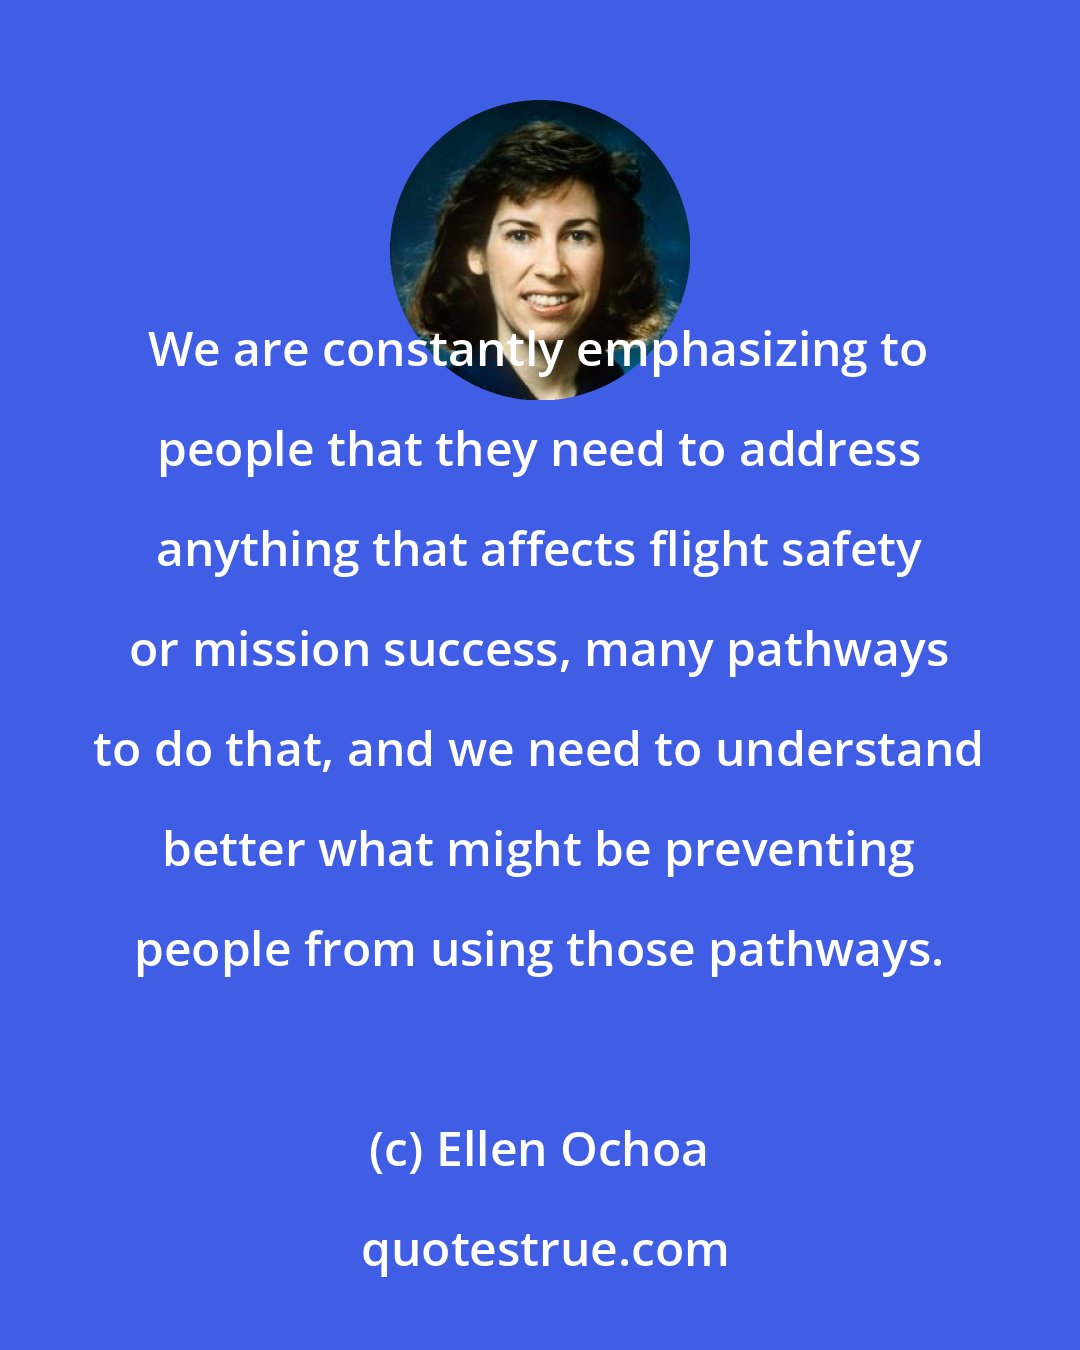 Ellen Ochoa: We are constantly emphasizing to people that they need to address anything that affects flight safety or mission success, many pathways to do that, and we need to understand better what might be preventing people from using those pathways.